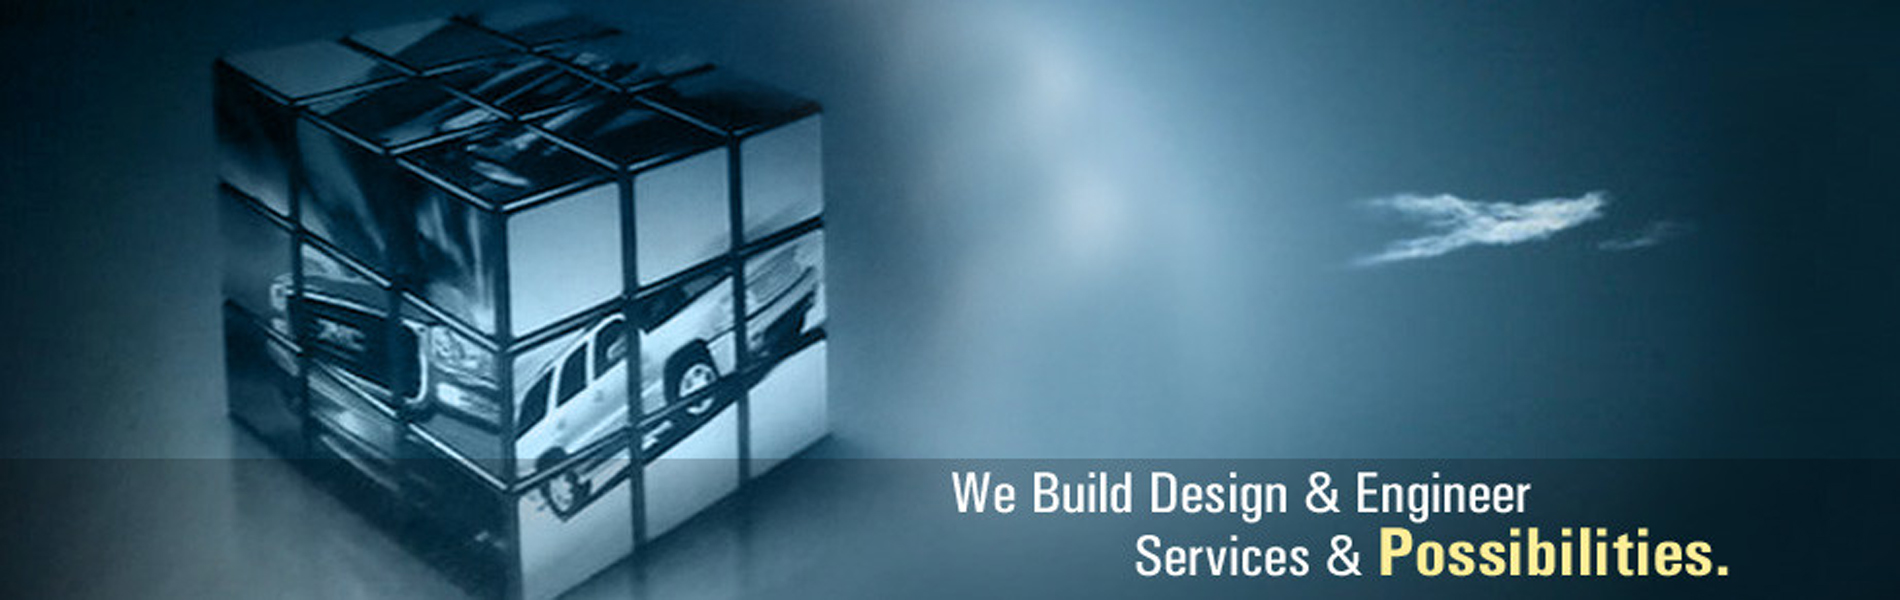 Engineering and Construction Services